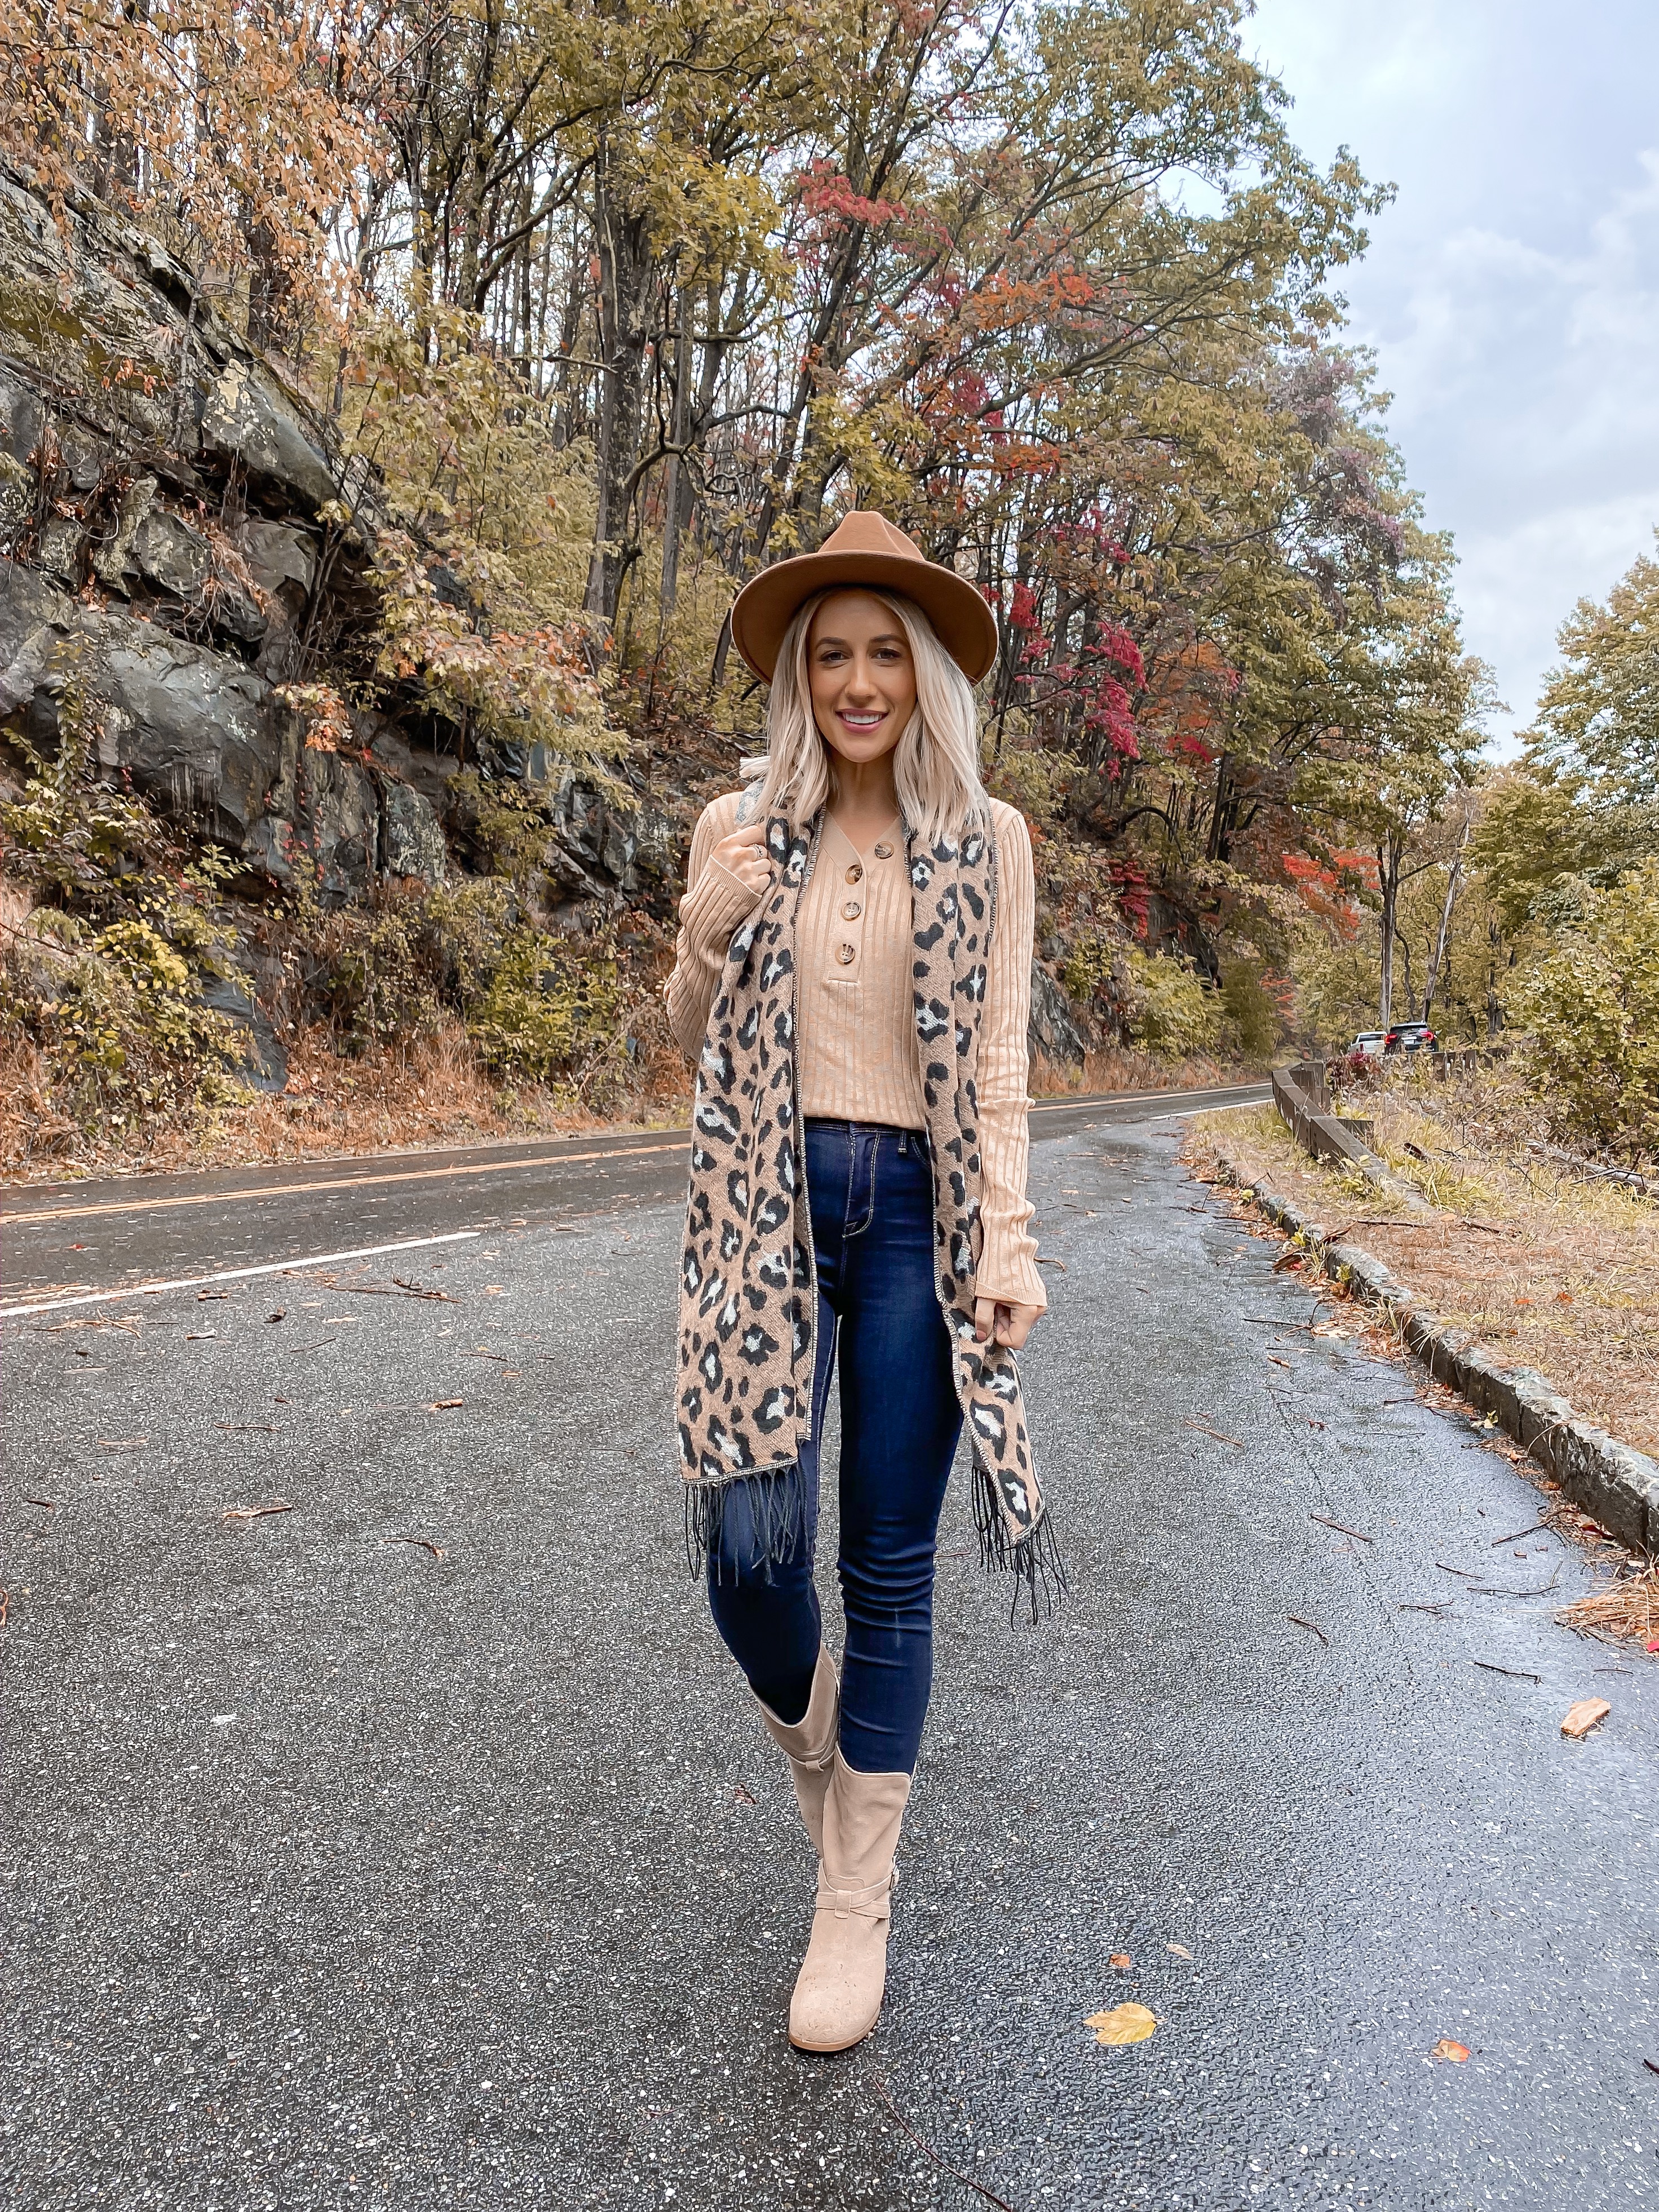 AFFORDABLE FALL OUTFIT UNDER $20 SMOKEY MOUNTAINS LAURA BEVERLIN LEOPARD SCARF 1